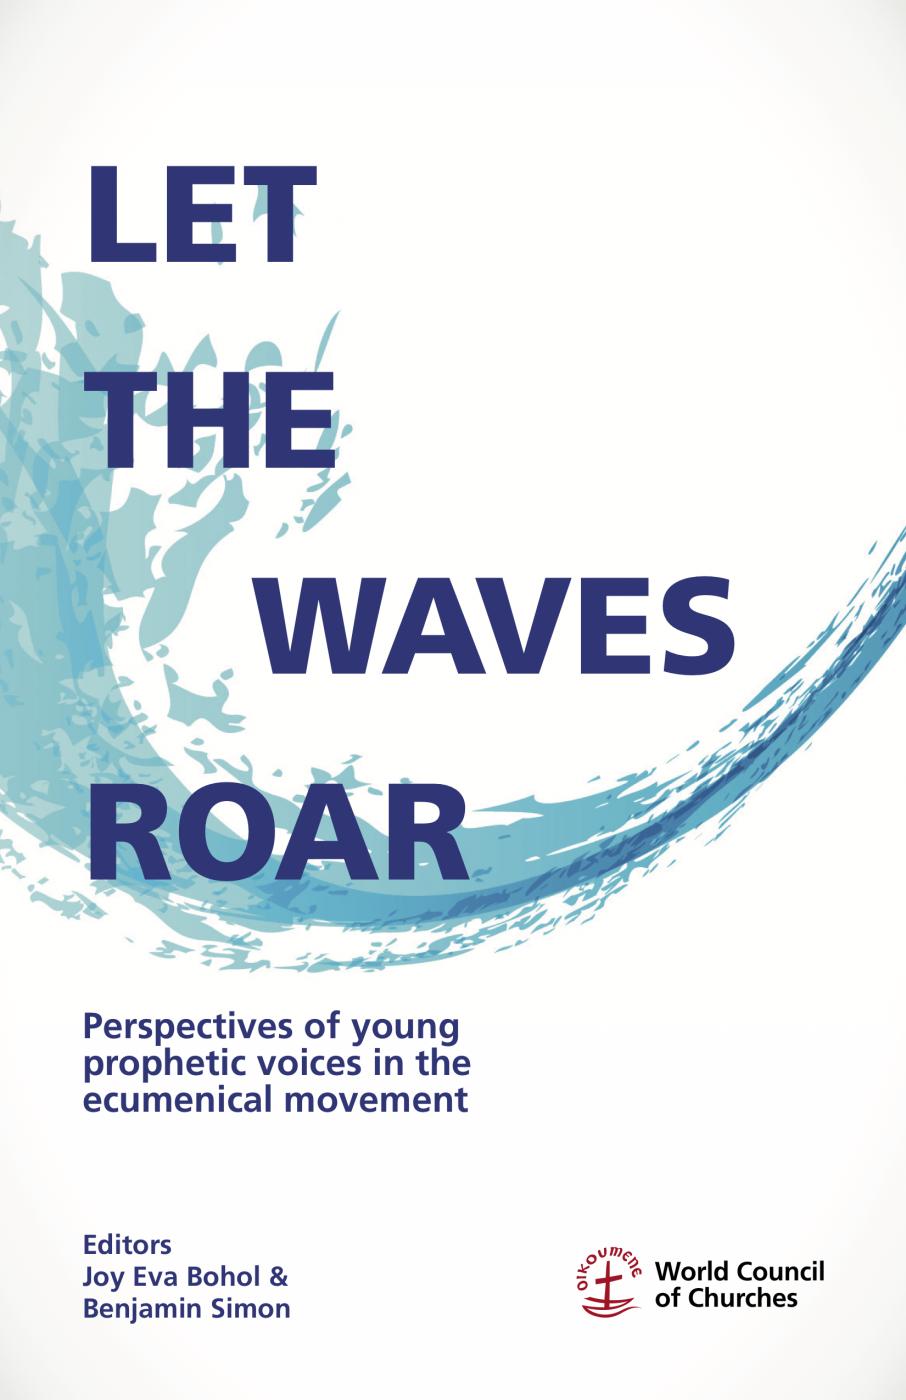 Graphic image of waves and water with text reading 'Let the waves roar' on top of it.